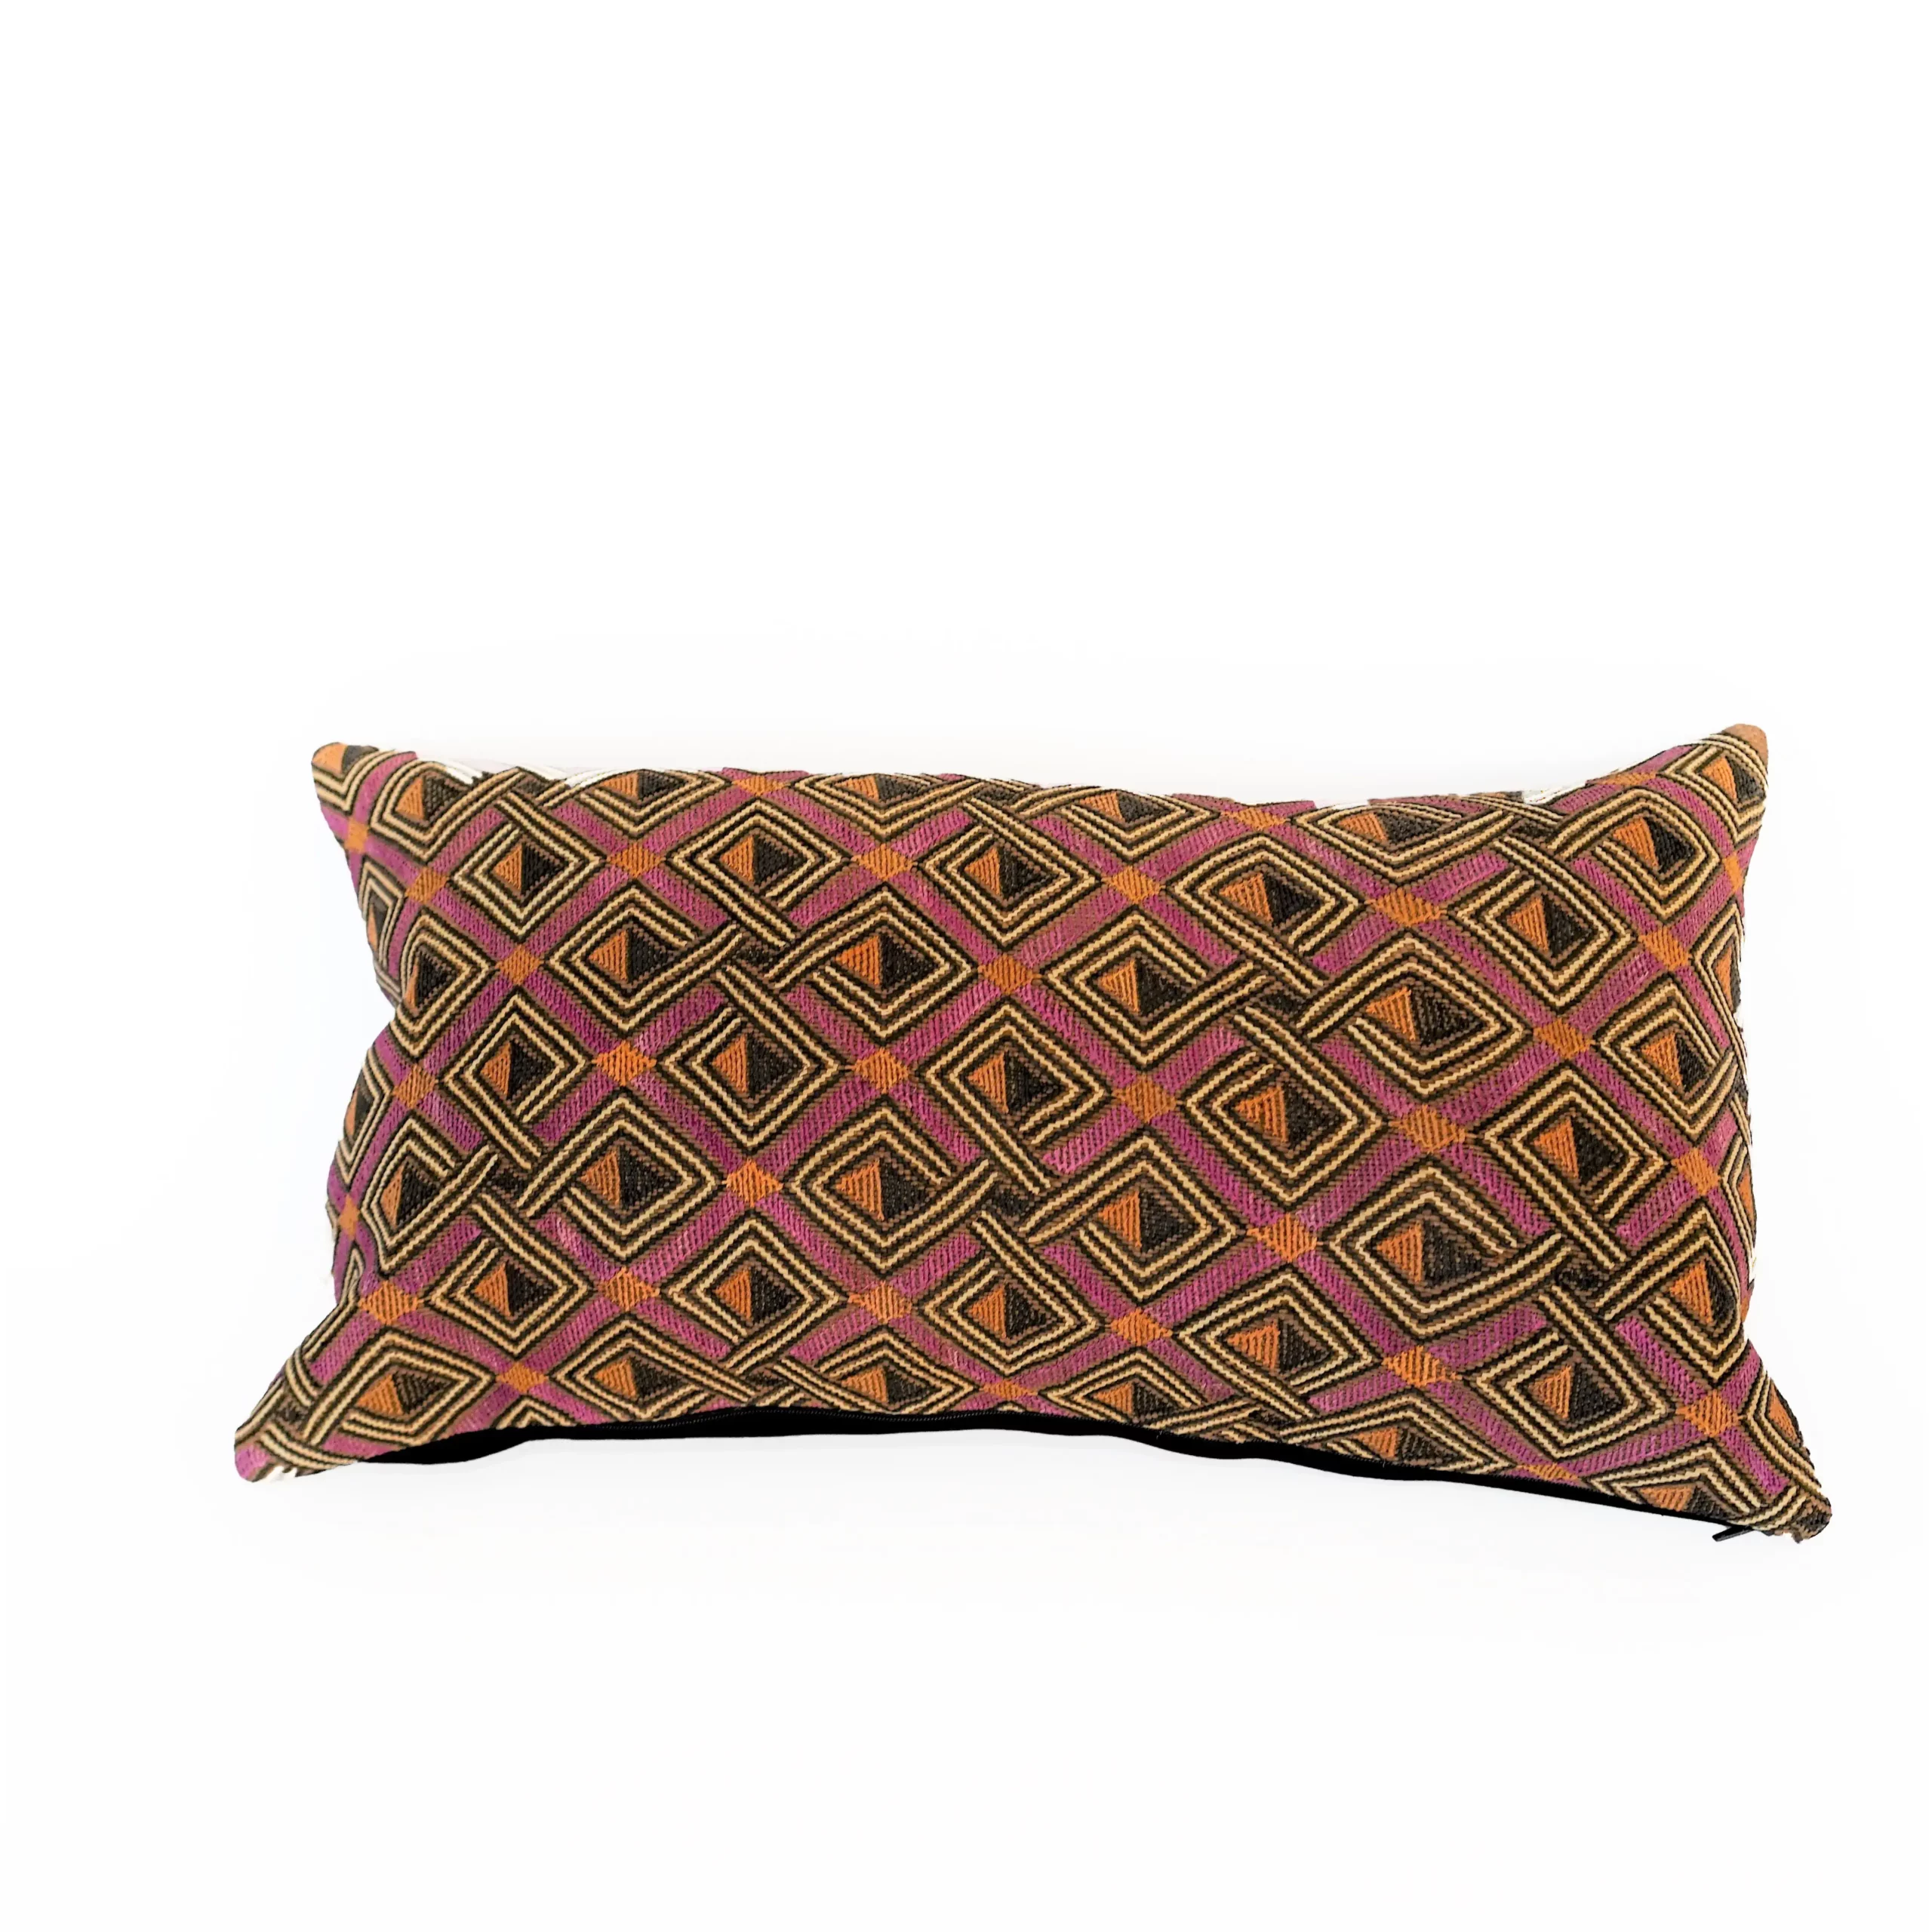 Embroidered Bohemian Pillow Cover